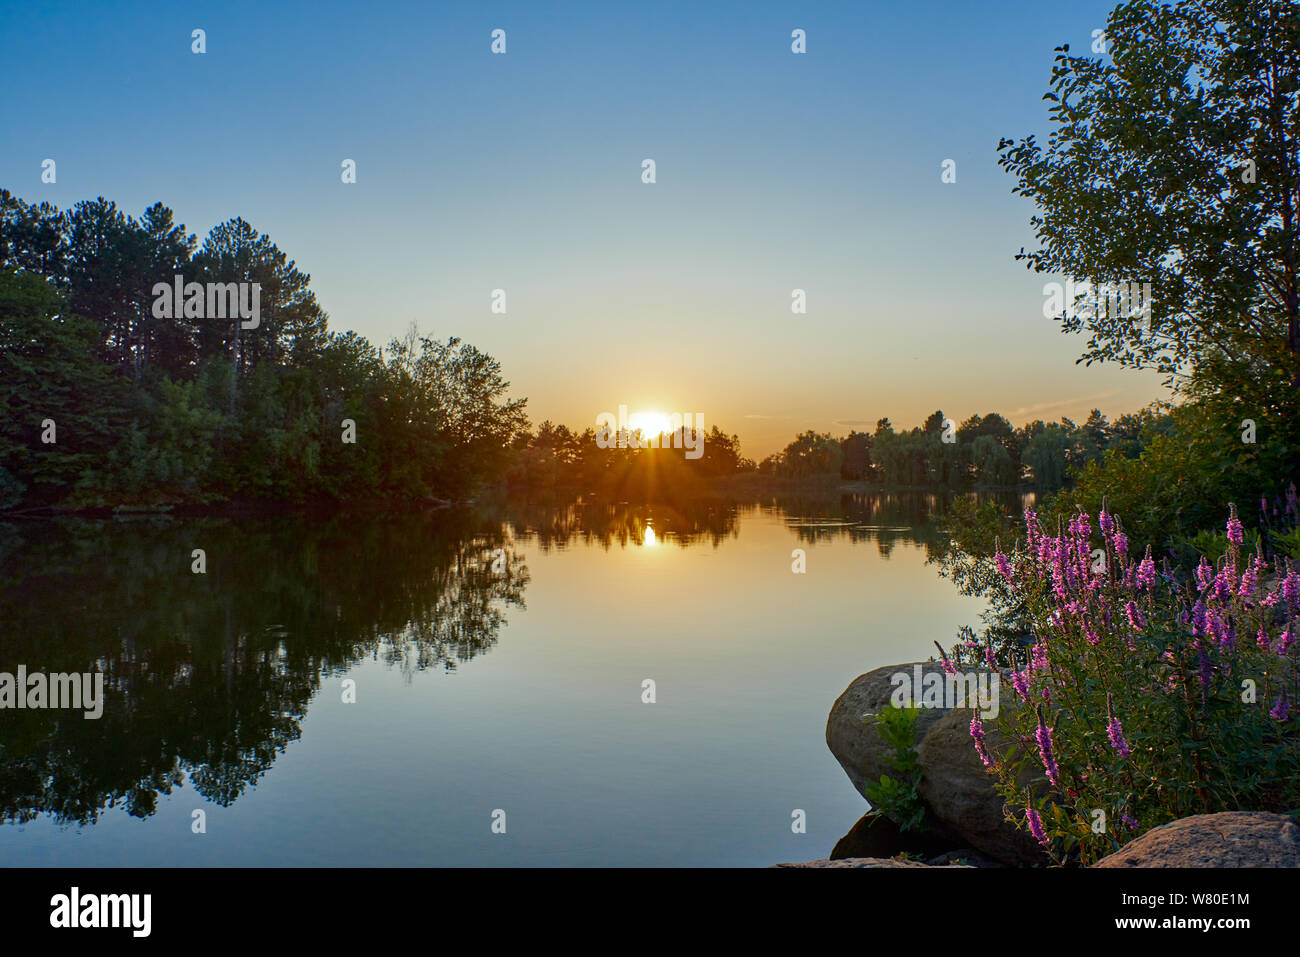 Sunset on a lake with blue water and sky, in the foreground sage and round stones Stock Photo